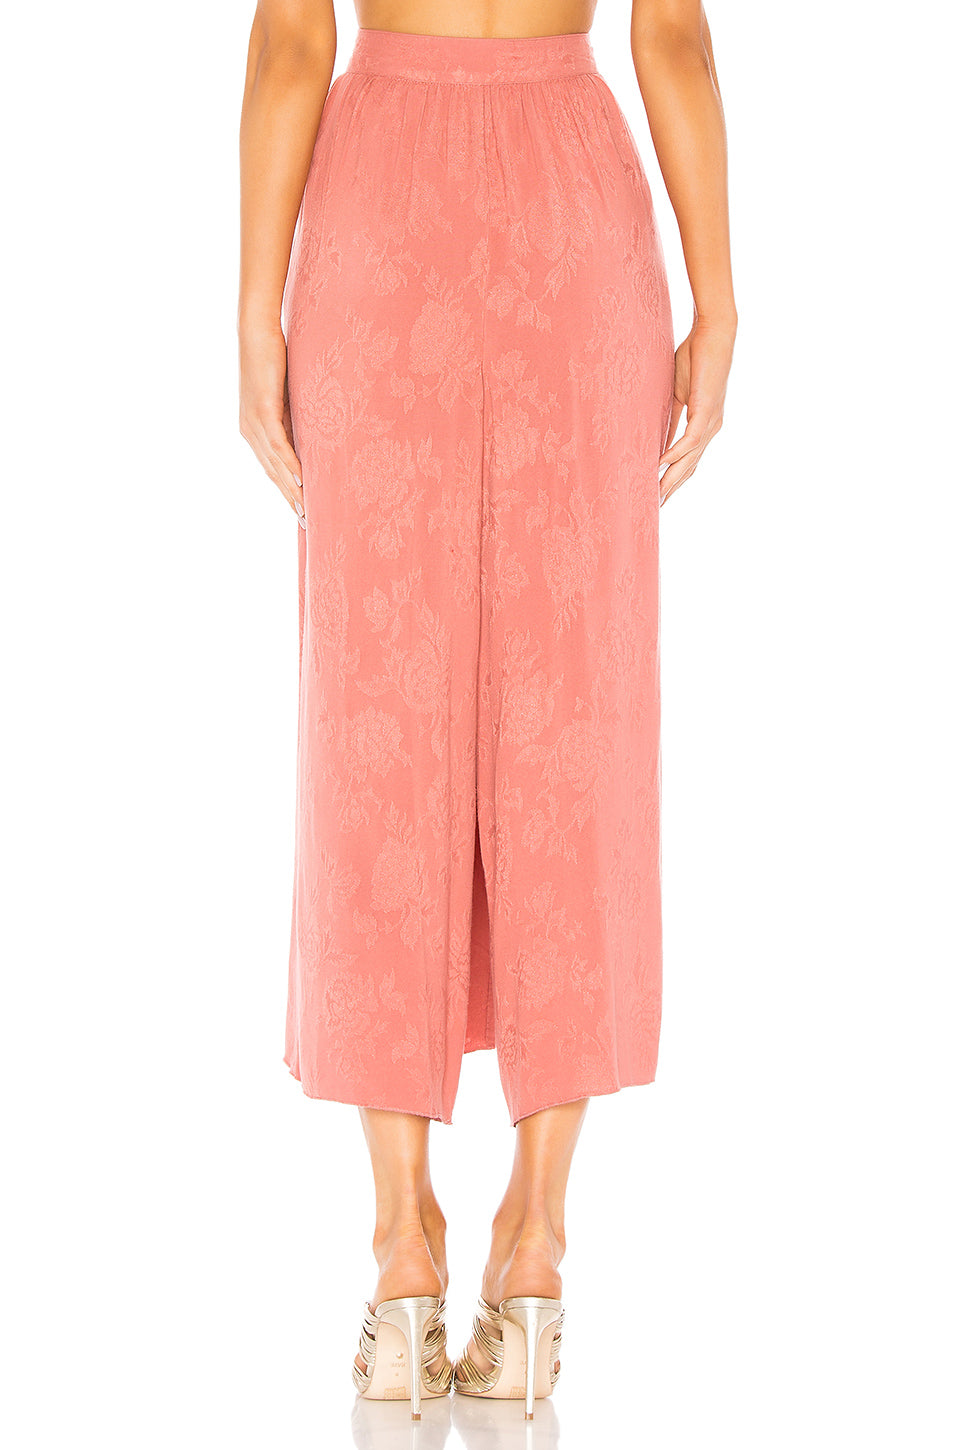 Banae Pant in DUSTY ROSE